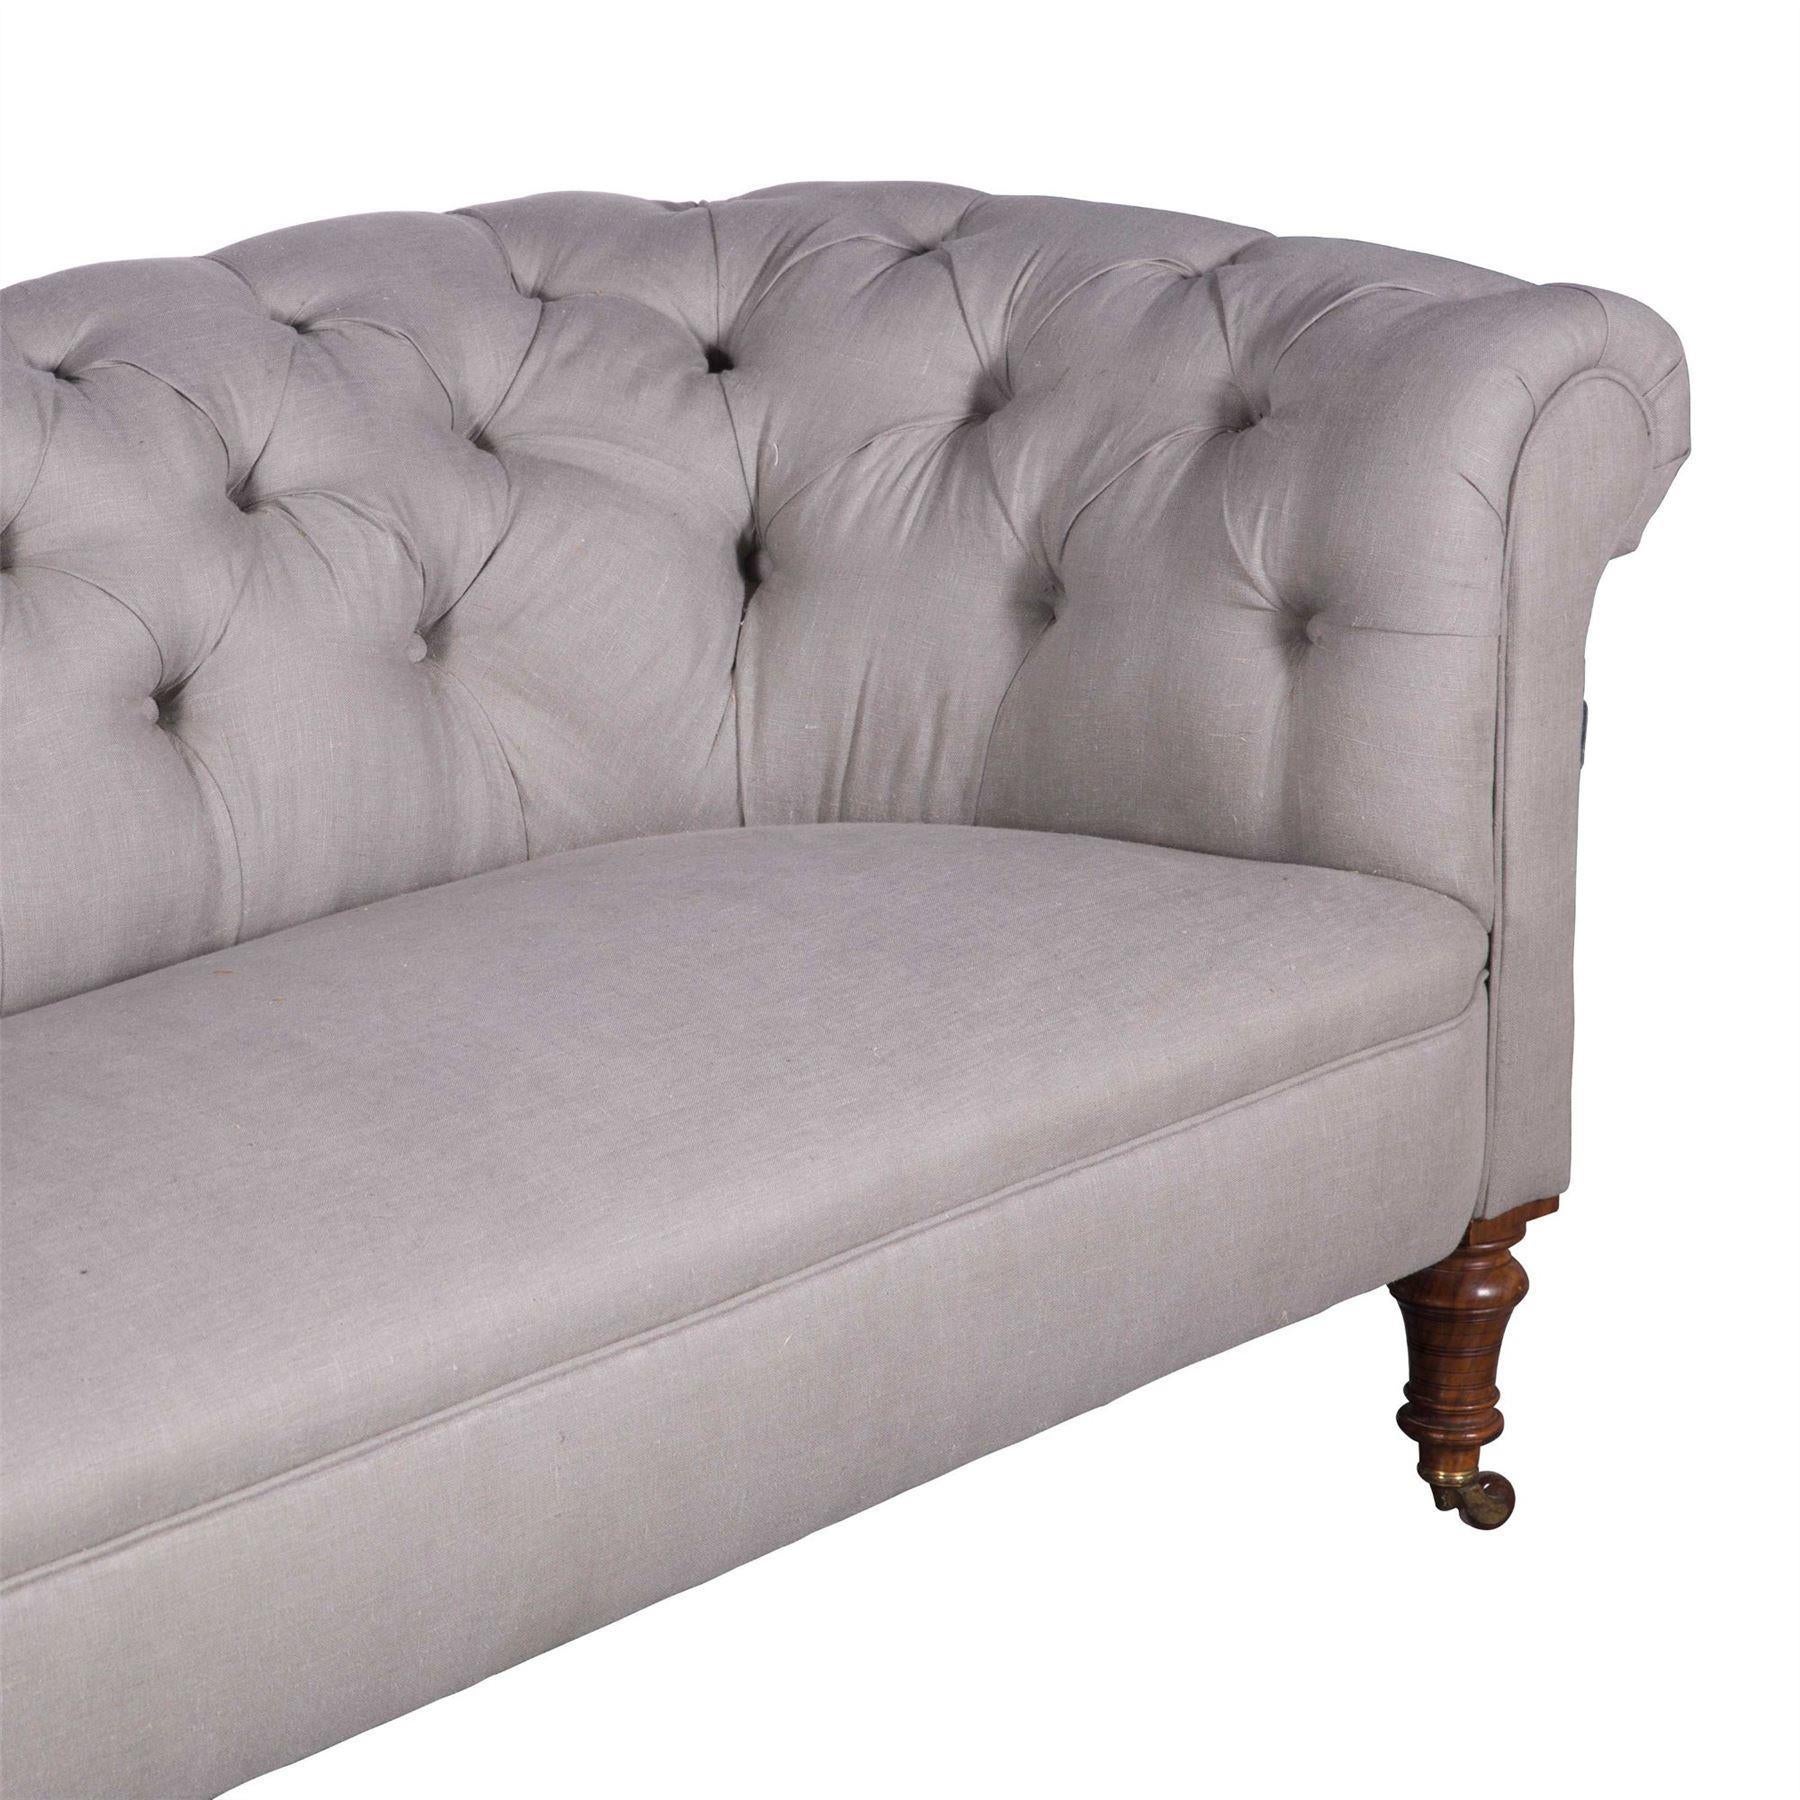 19th Century Victorian Deep Buttoned Chesterfield